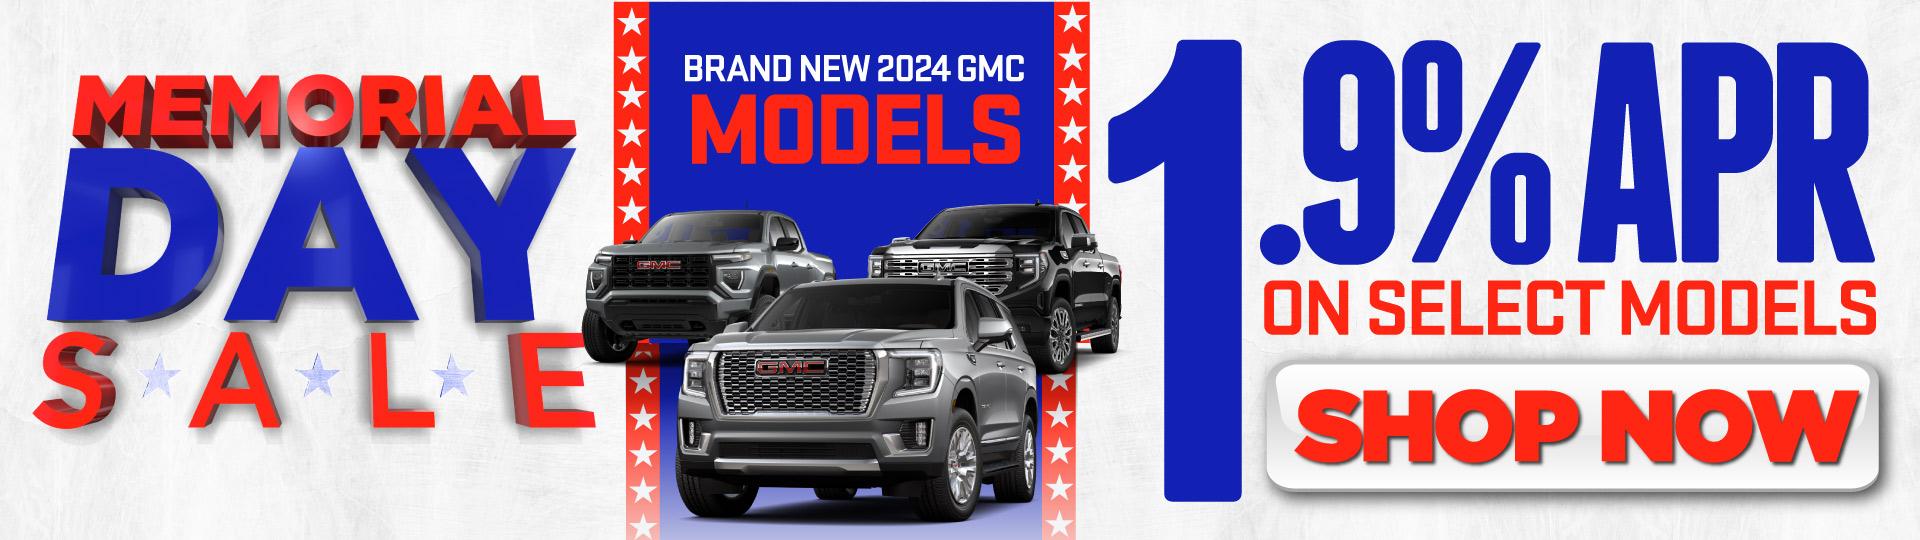 Brand New 2024 GMC Models 1.9% APR on Select Models | Shop Now